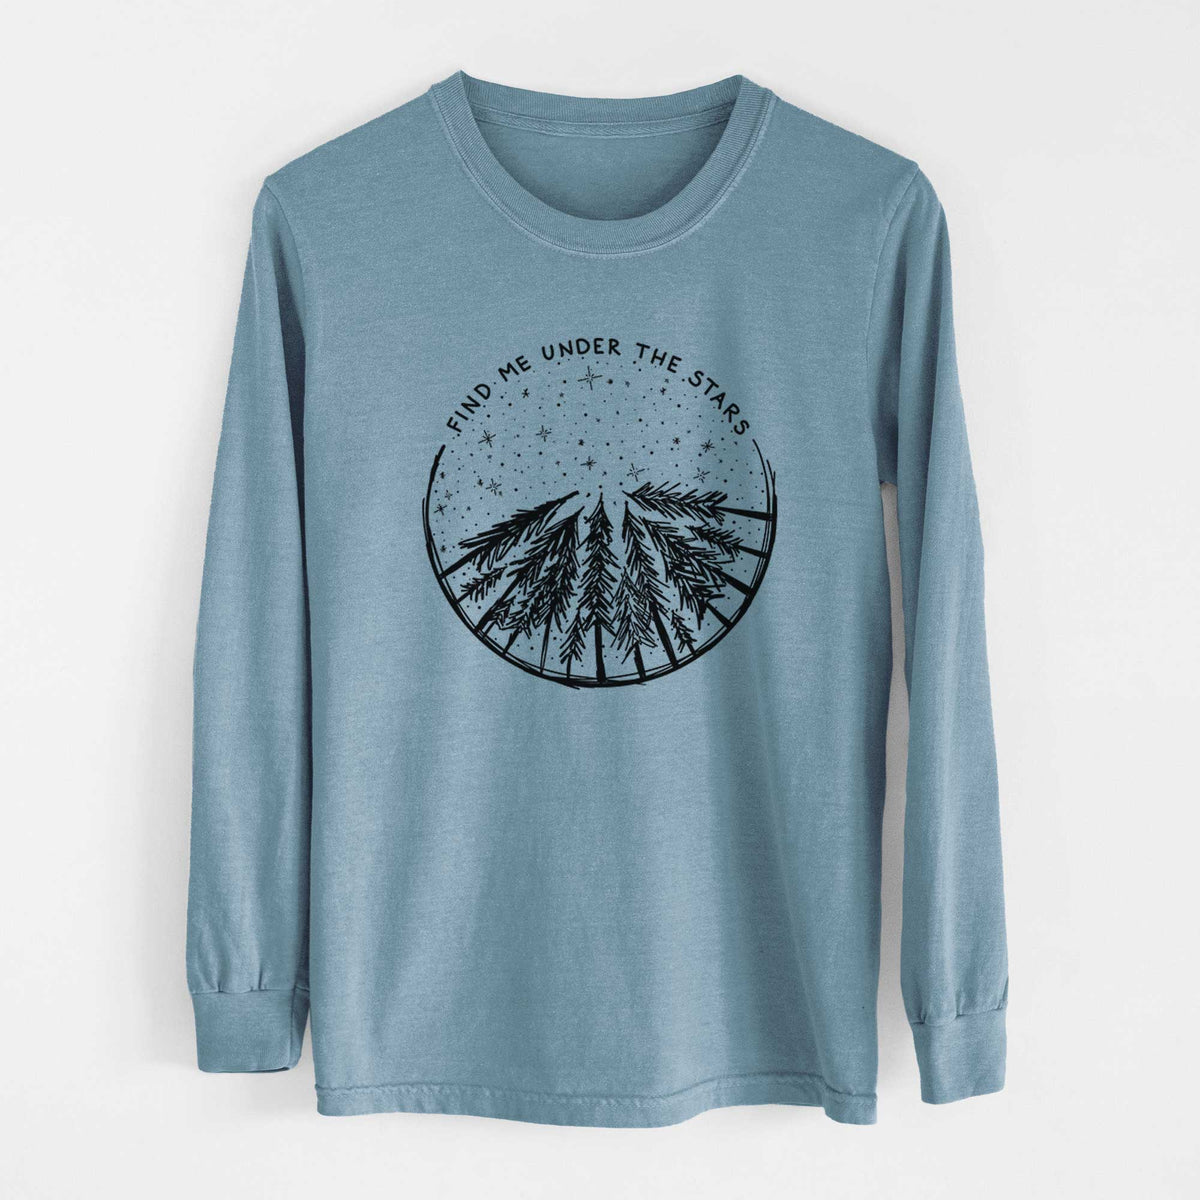 Find Me Under the Stars - Heavyweight 100% Cotton Long Sleeve